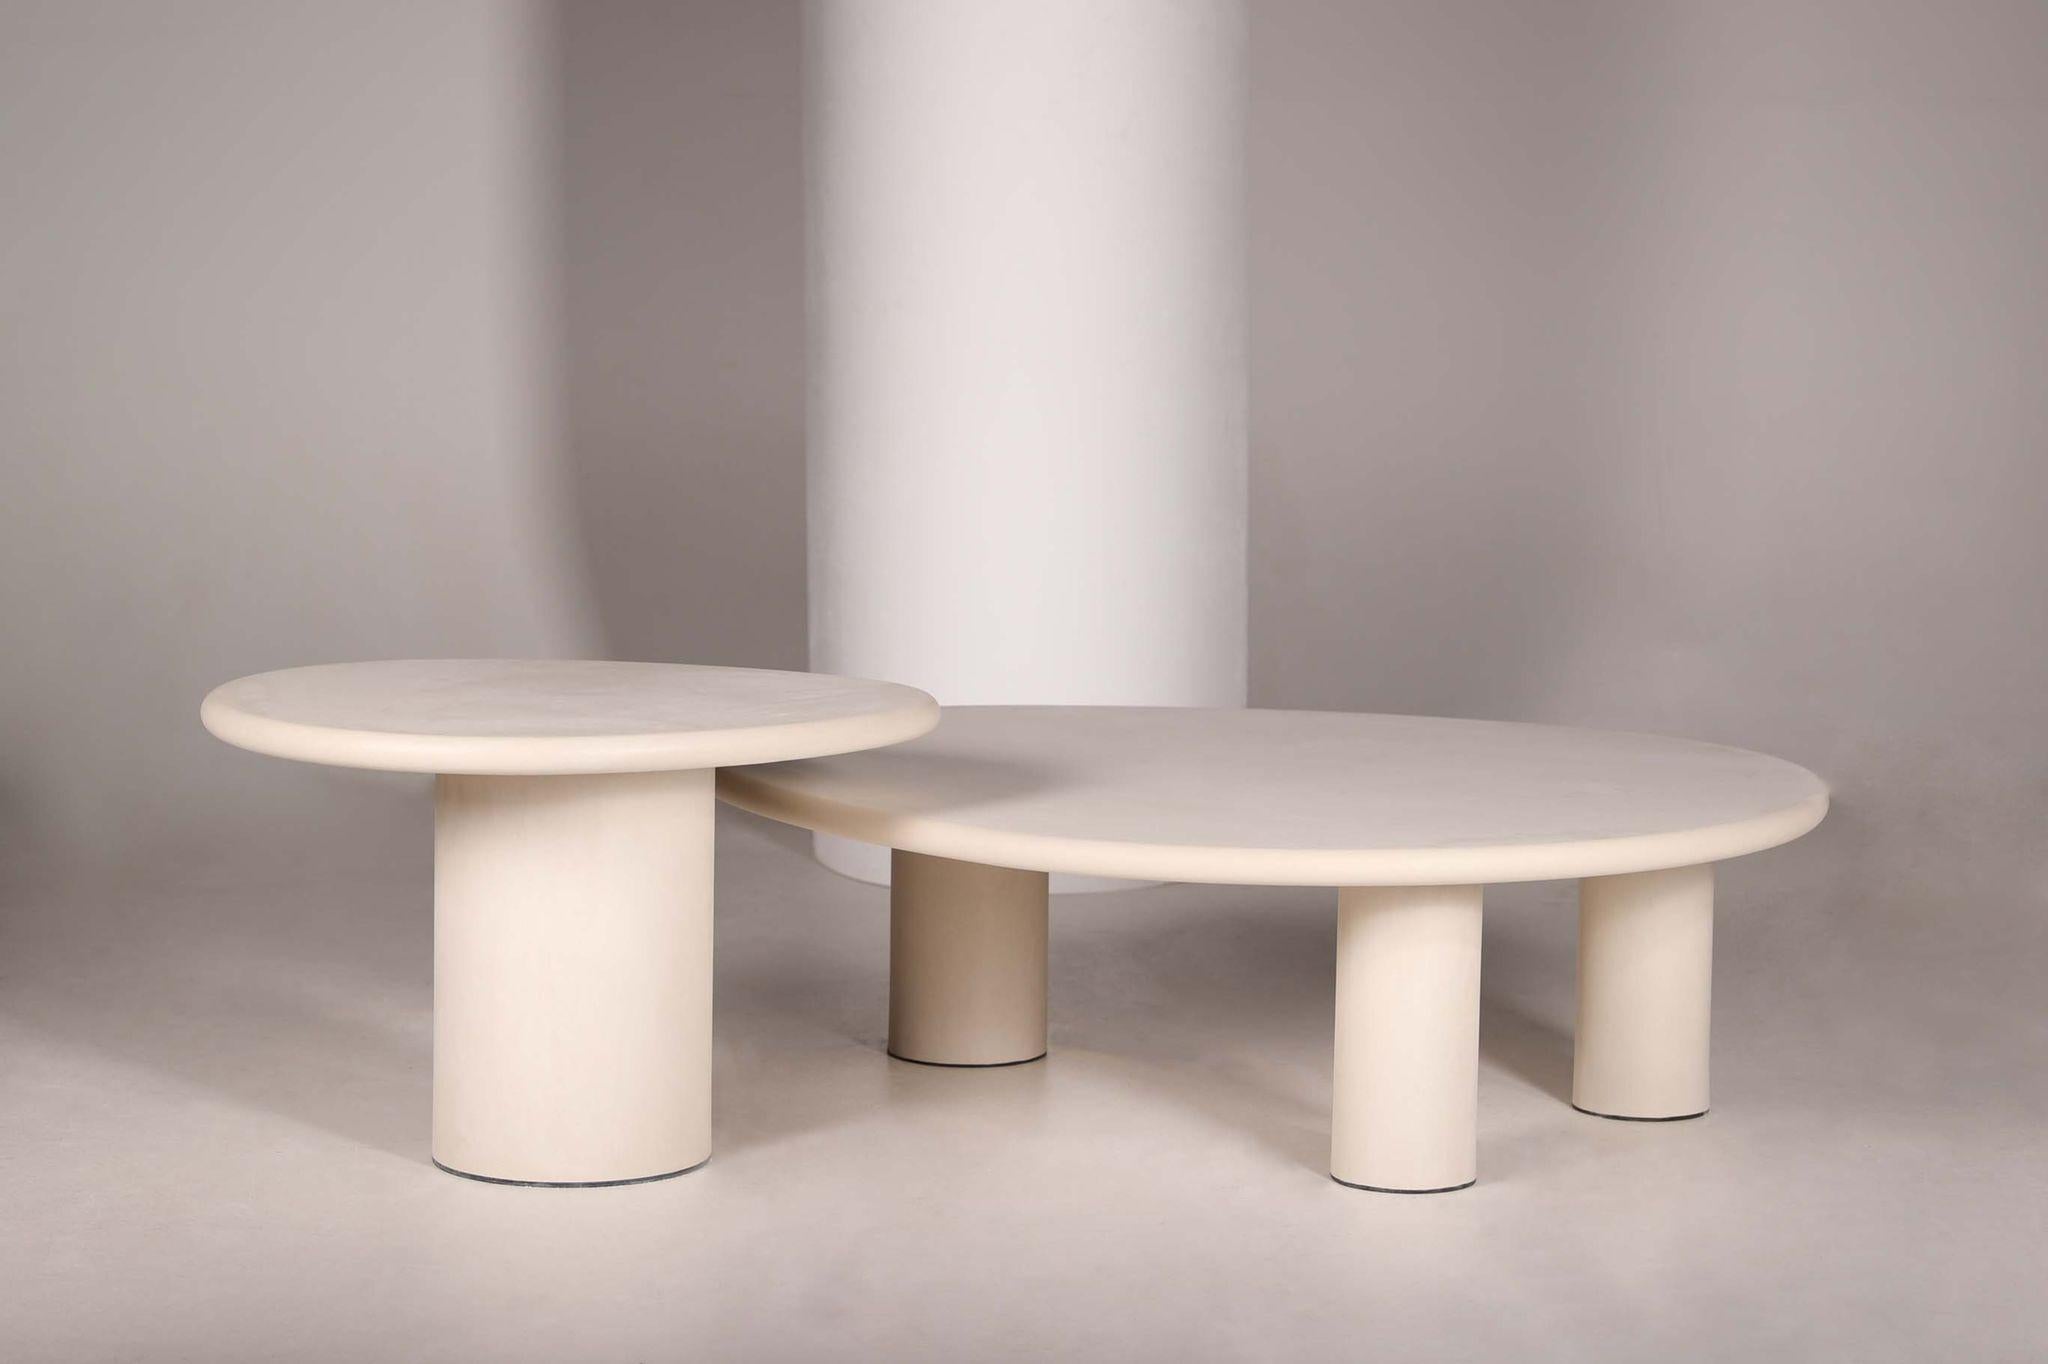 Handmade rock-shaped natural plaster table set by Galerie Philia Edition
Dimensions: 
80 x 76 x 50, Foot Ø 30 cm
130 x 110 x 38, Foot Ø 20 cm 
Materials: Mineral lime plaster.

Our tables are in mineral lime plaster, unlike mortex, they are